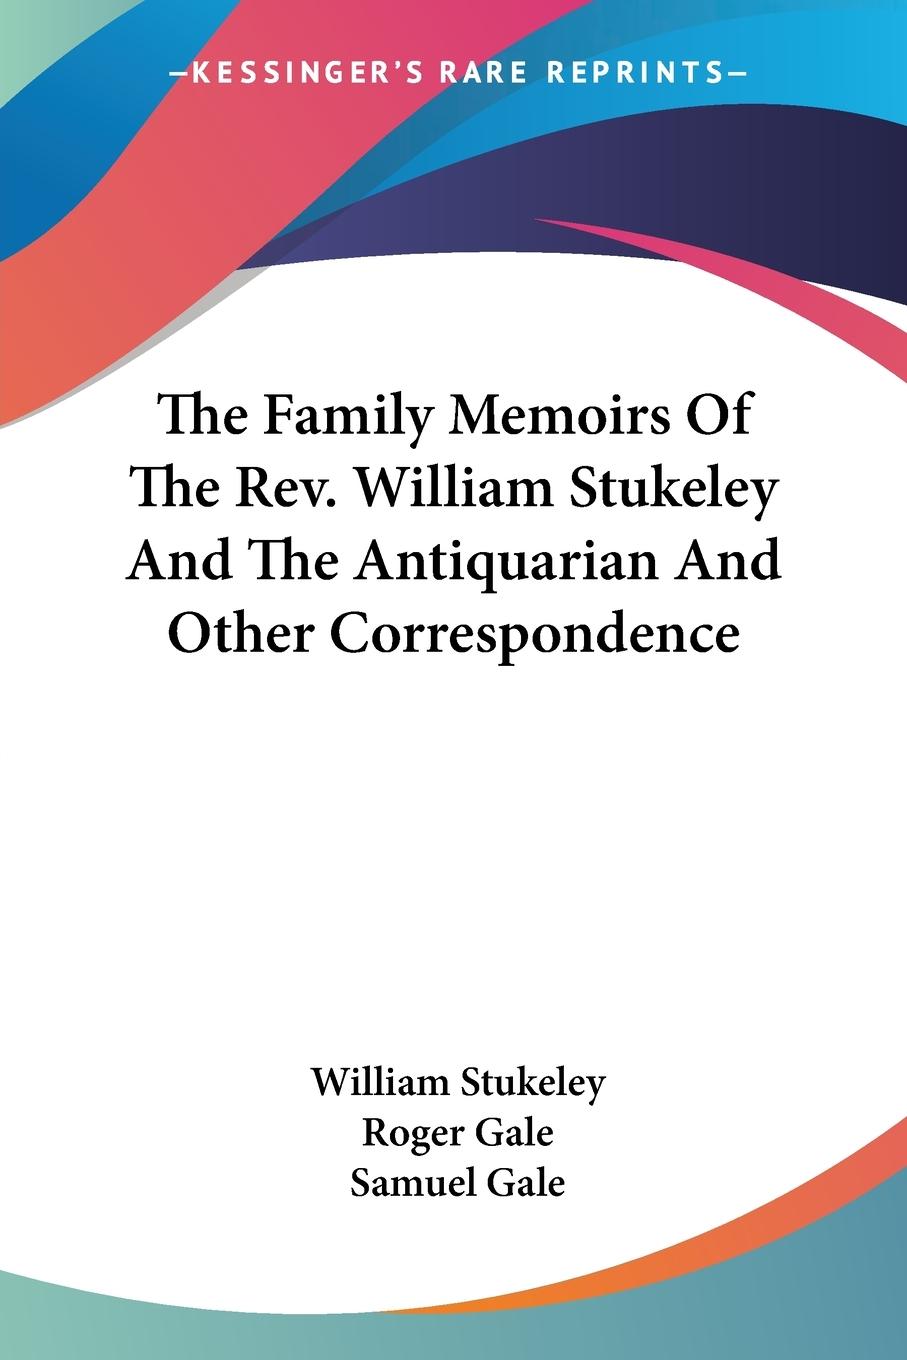 The Family Memoirs Of The Rev. William Stukeley And The Antiquarian And Other Correspondence - Stukeley, William Gale, Roger Gale, Samuel